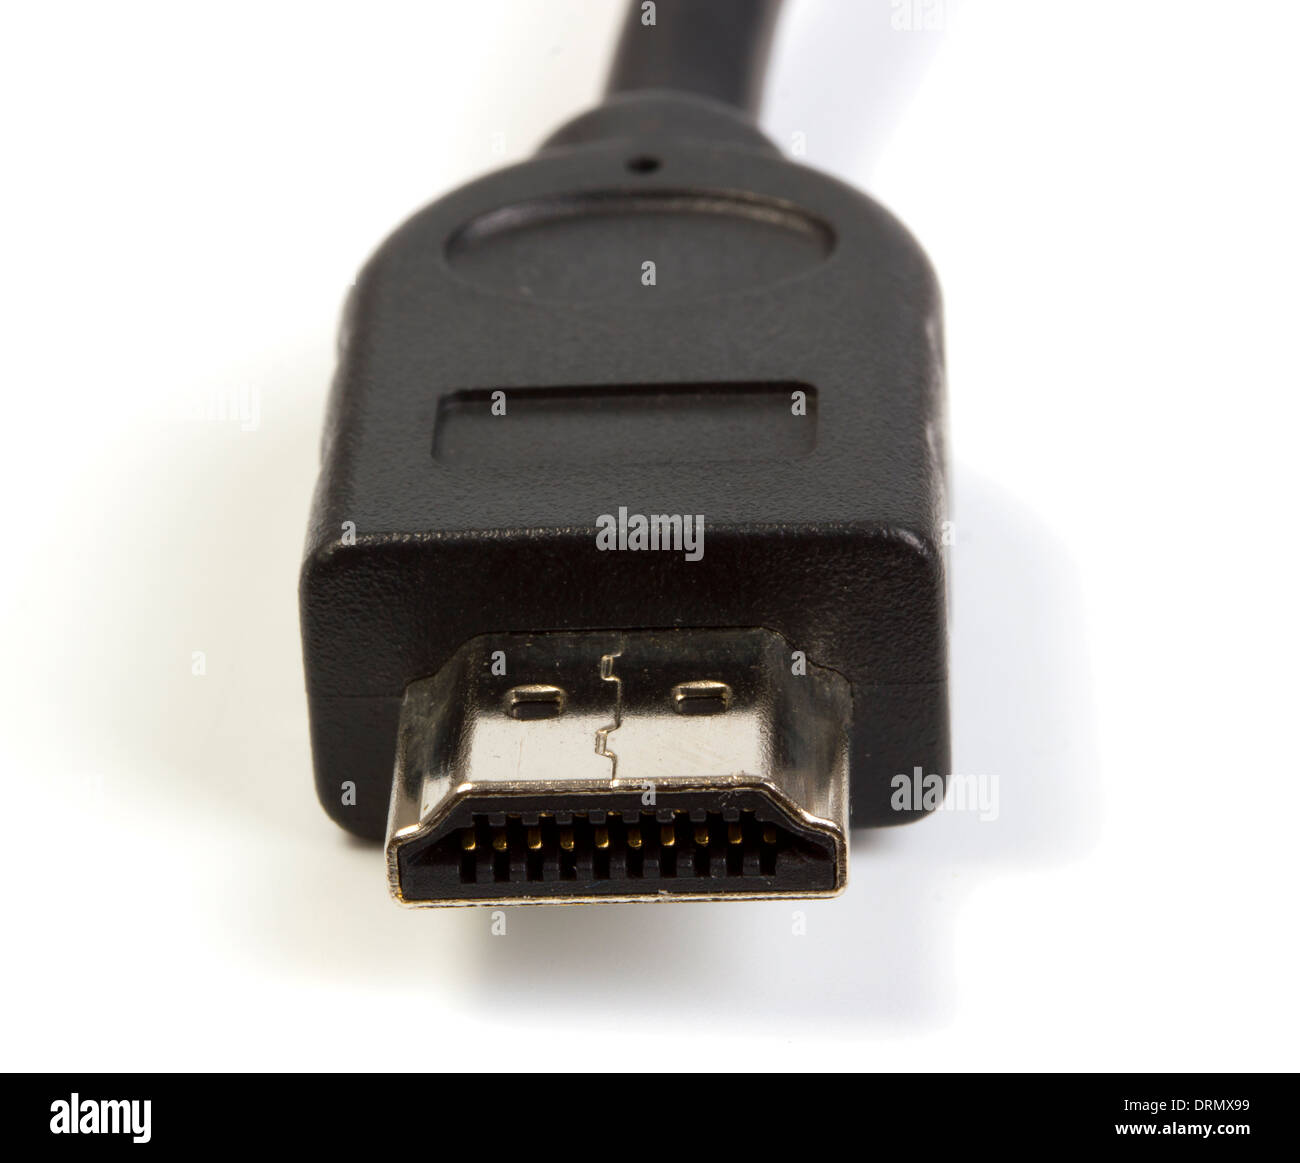 Hdmi Cable Close Up High Resolution Stock Photography and Images - Alamy